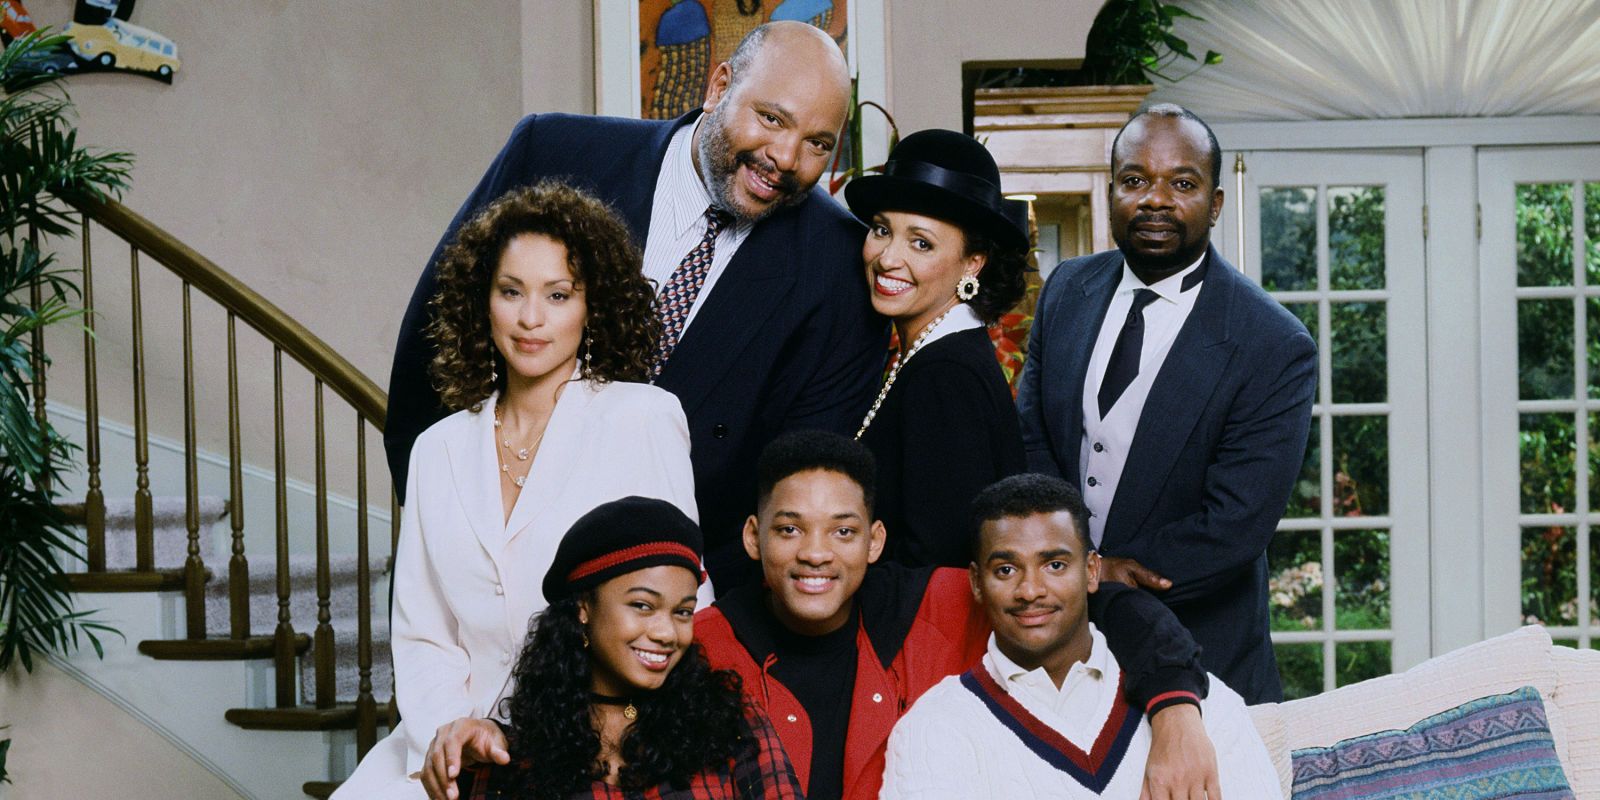 The cast in a group in the living room in The Fresh Prince of Bel Air